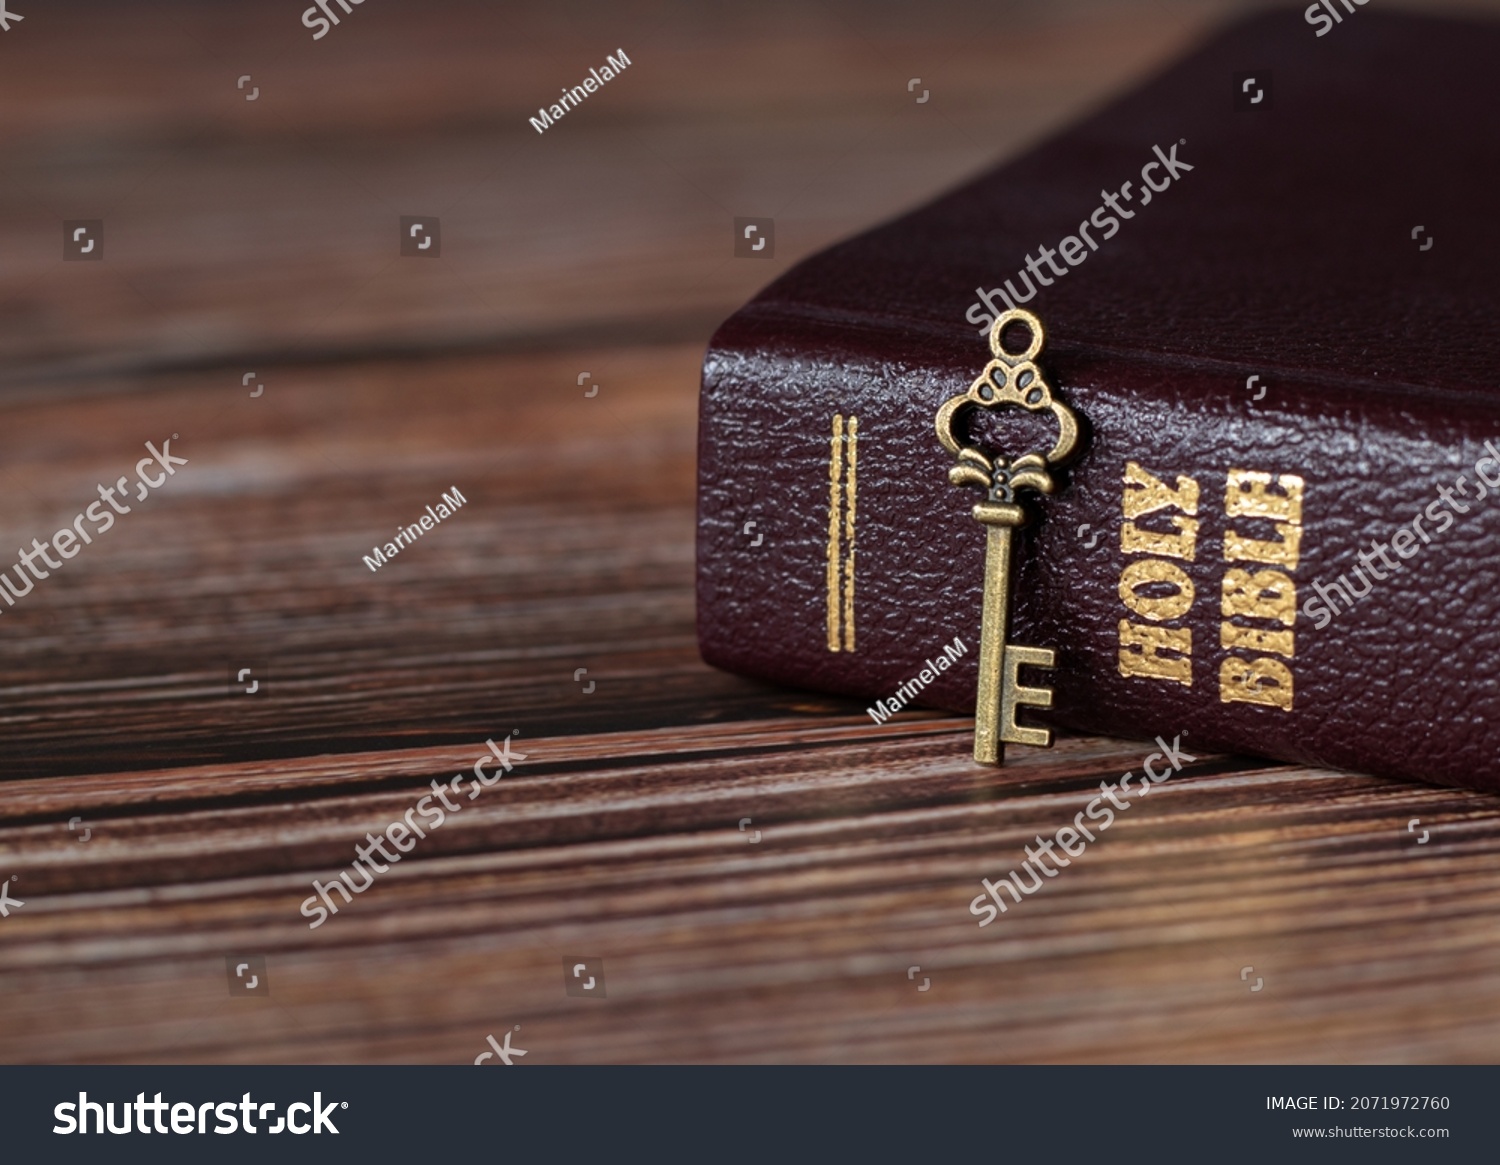 A rustic old vintage retro key with closed Holy Bible book with gold text on a wooden table. A Christian biblical concept of revelation, prayer, faith, and trust in God Jesus Christ. A close-up. #2071972760